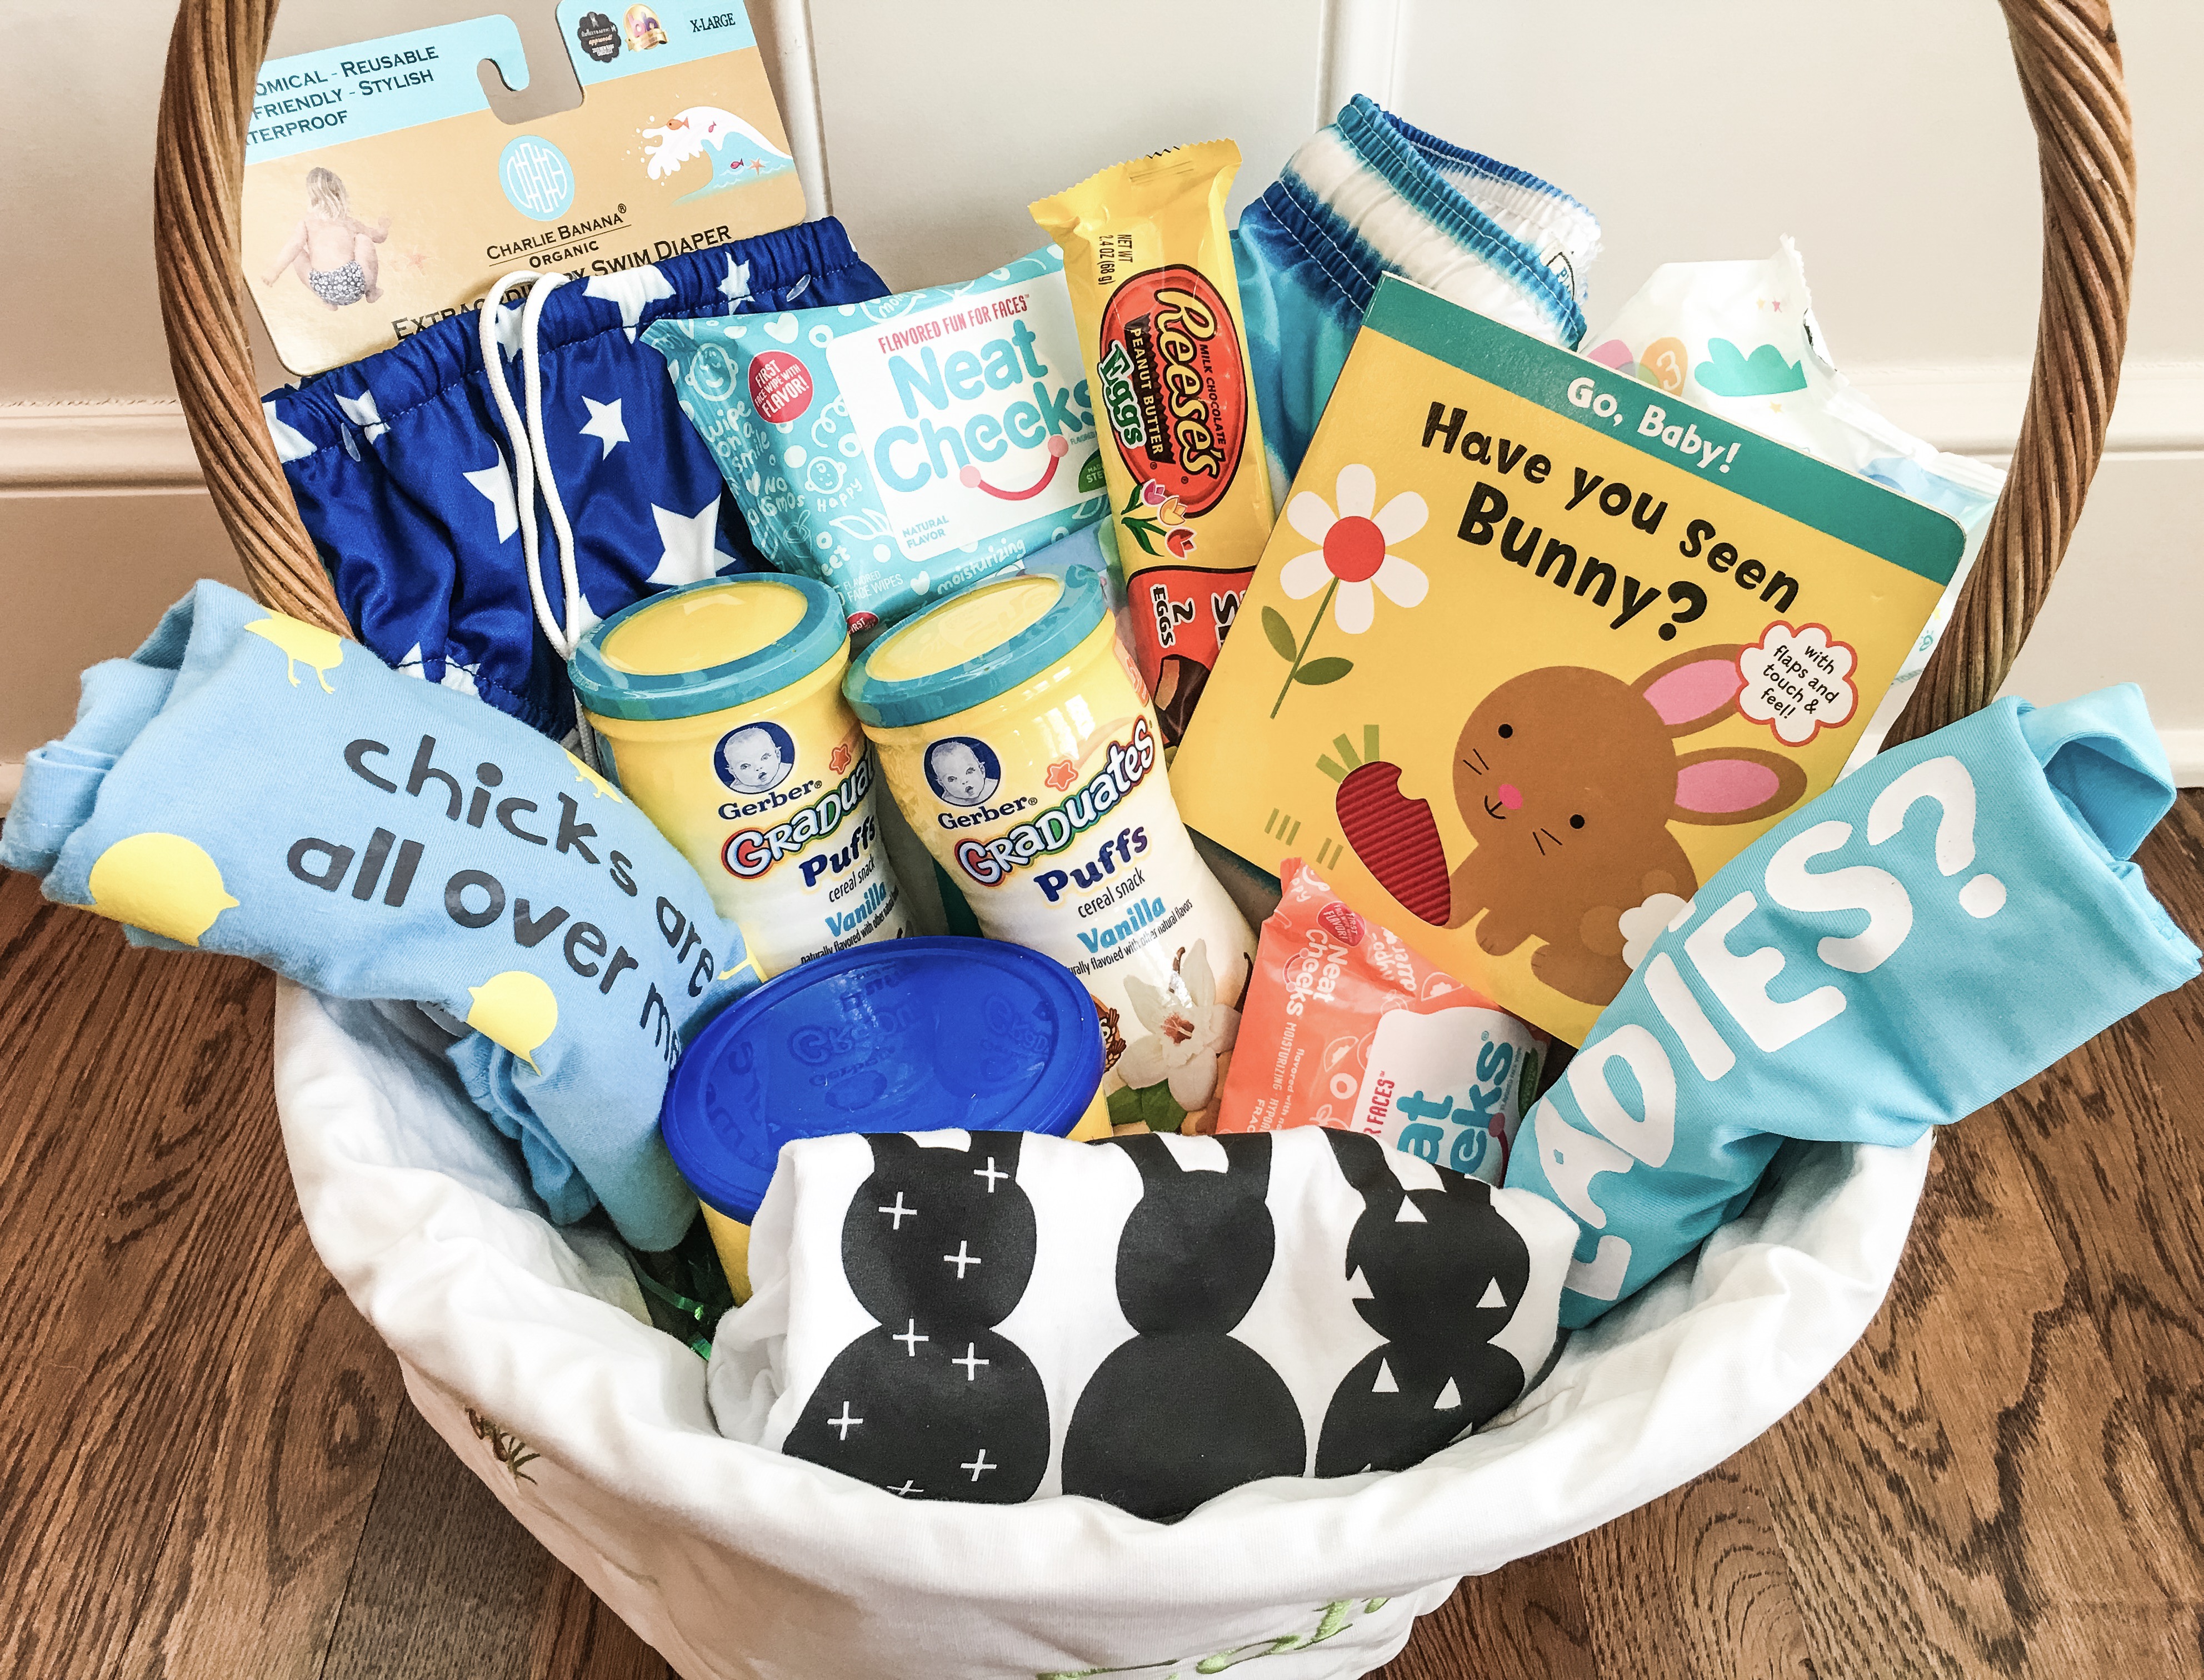 Easter Basket Ideas for 2-Year-Old Boys